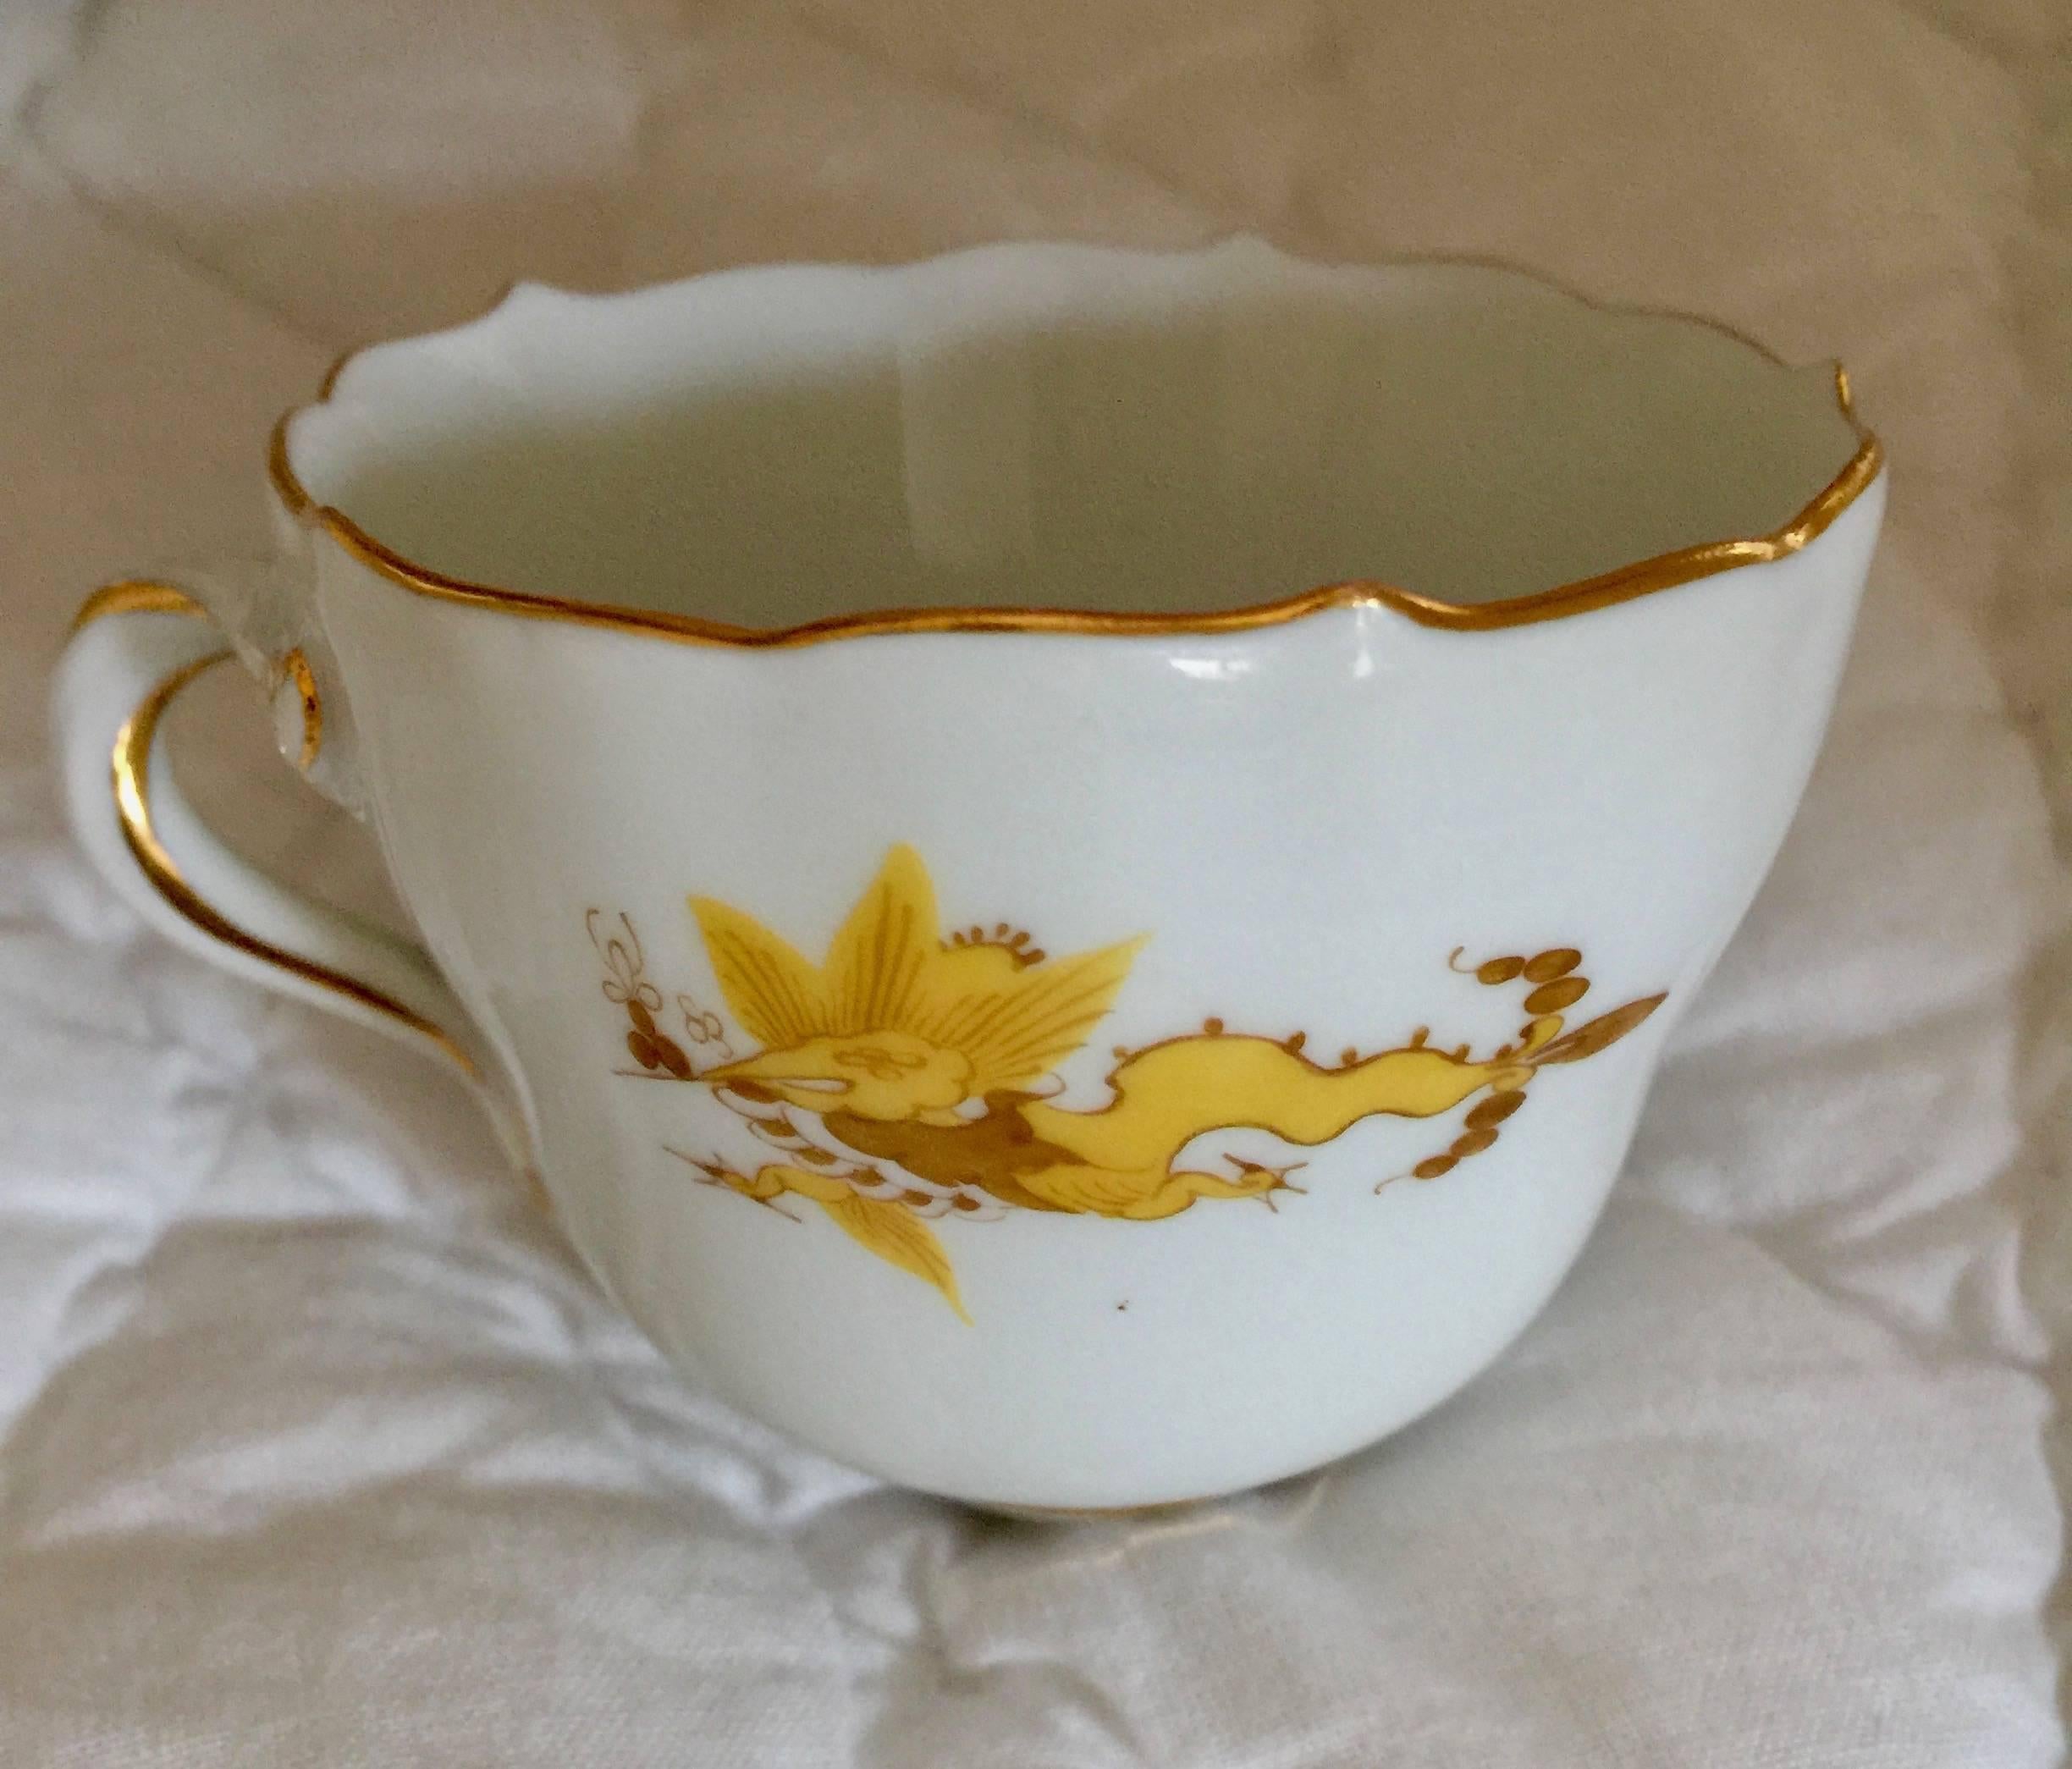 19th Century Meissen Porcelain Scalloped Yellow Dragon Demitasse Cup and Saucer In Excellent Condition In Washington Crossing, PA